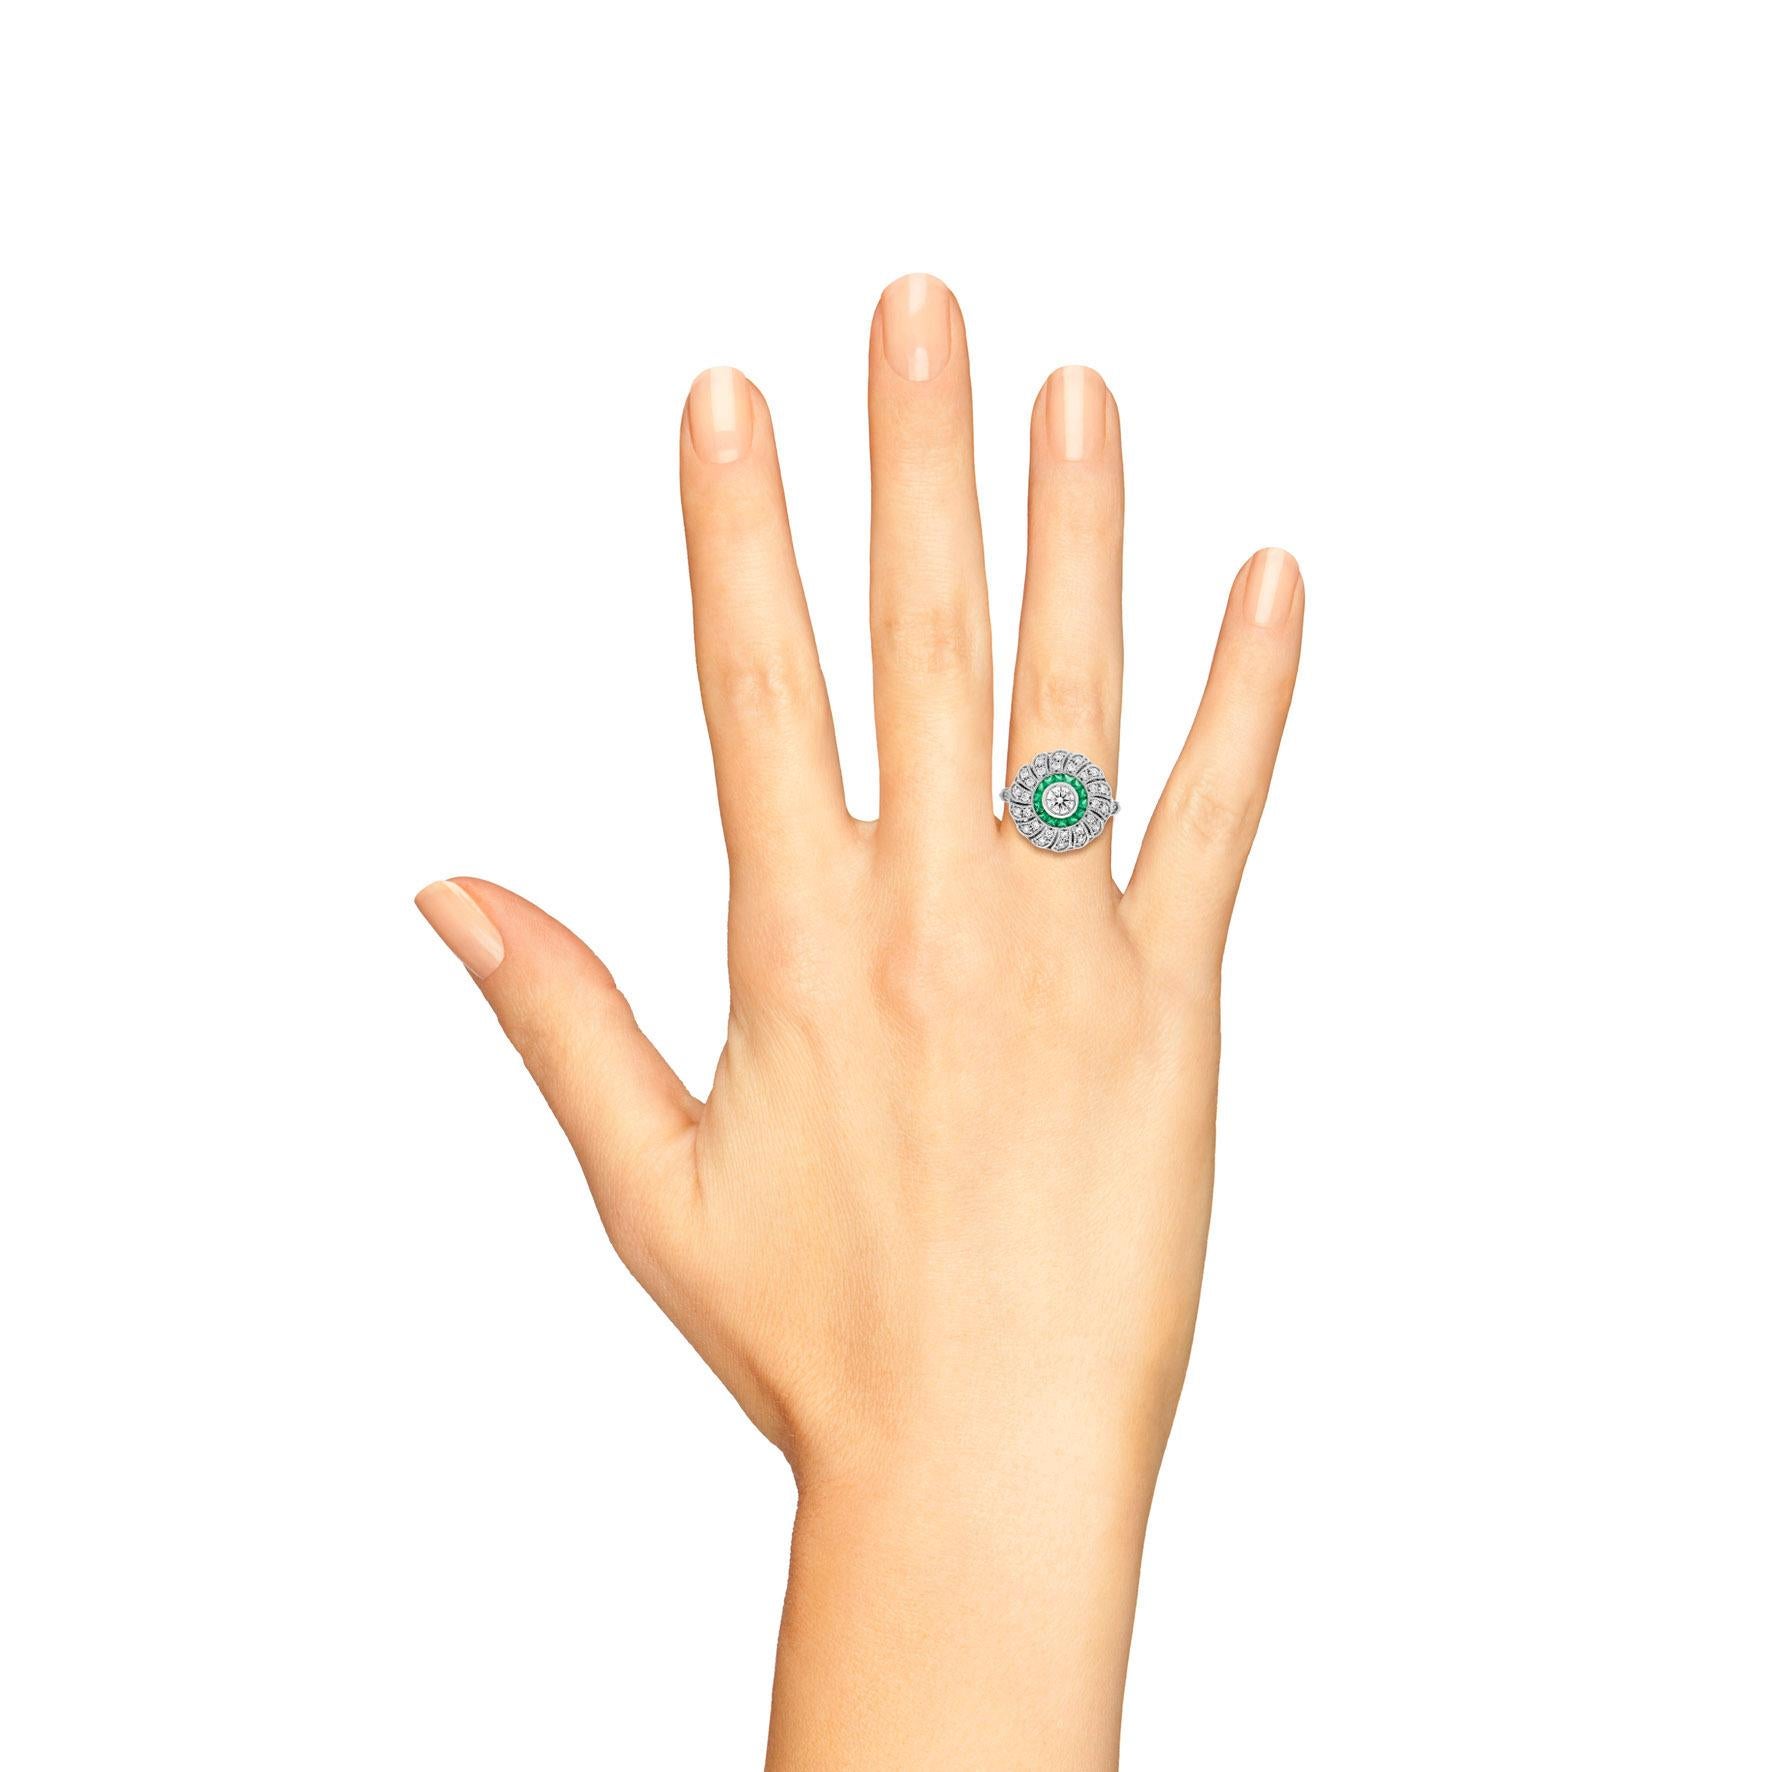 This Art Deco style Diamond and Emerald Ring is absolutely divine. It’s fashioned from 18k white gold and centered with 0.35 carat round brilliant cut diamond surrounded by French cut emerald. The outer halo has total of fourteen diamonds. The ring